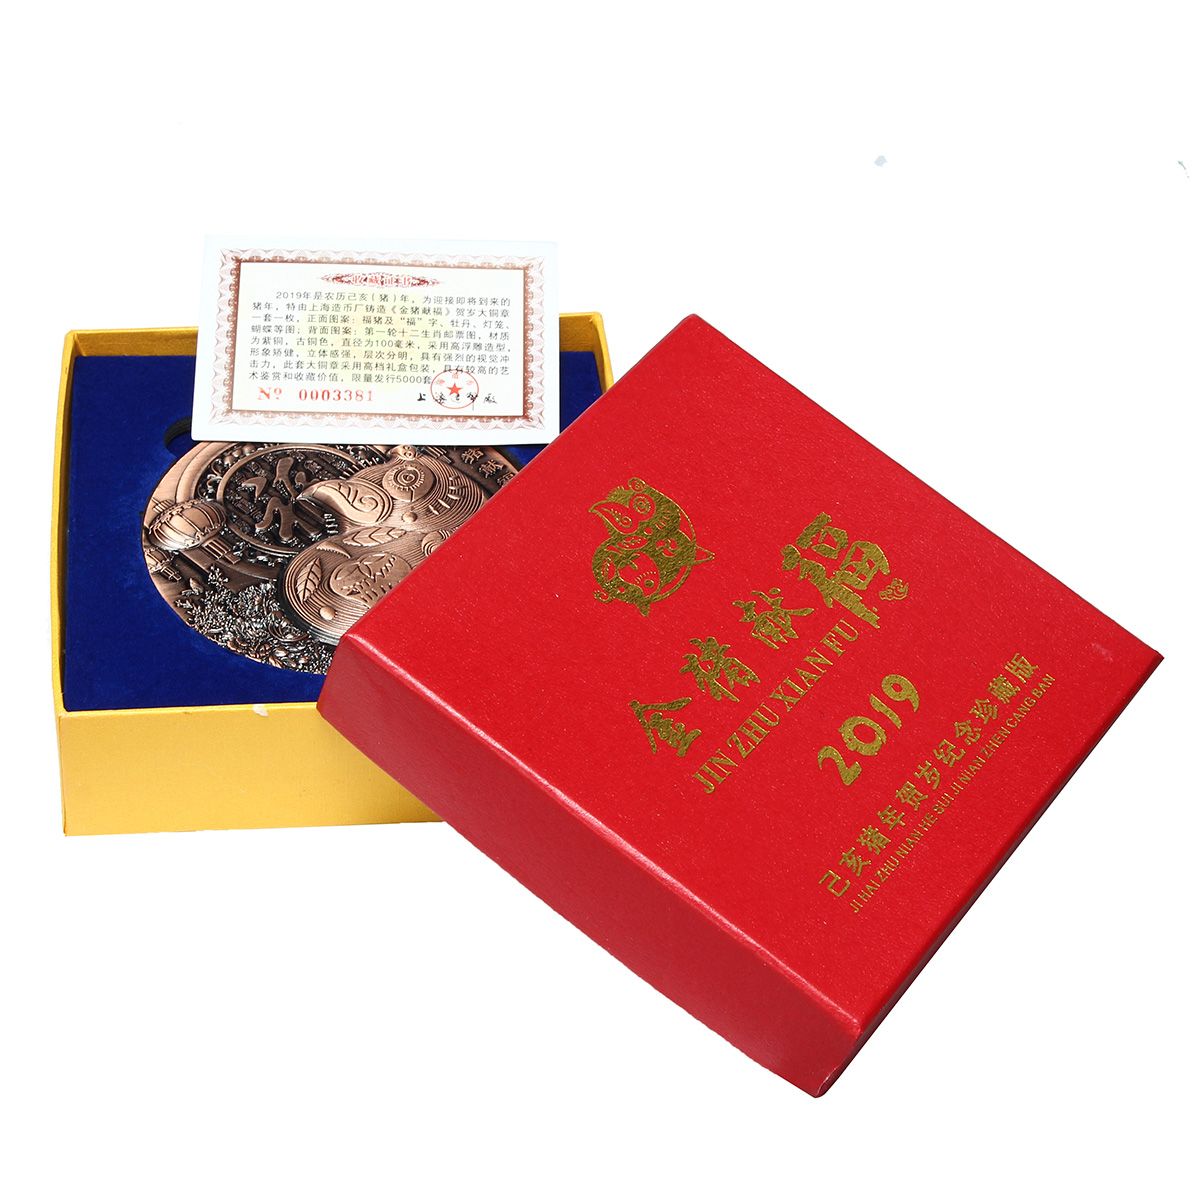 2019-Copper-Chinese-Lunar-Year-of-the-Pig-Coin-Collection-Luck-Mascot-Gift-Decorations-1566635